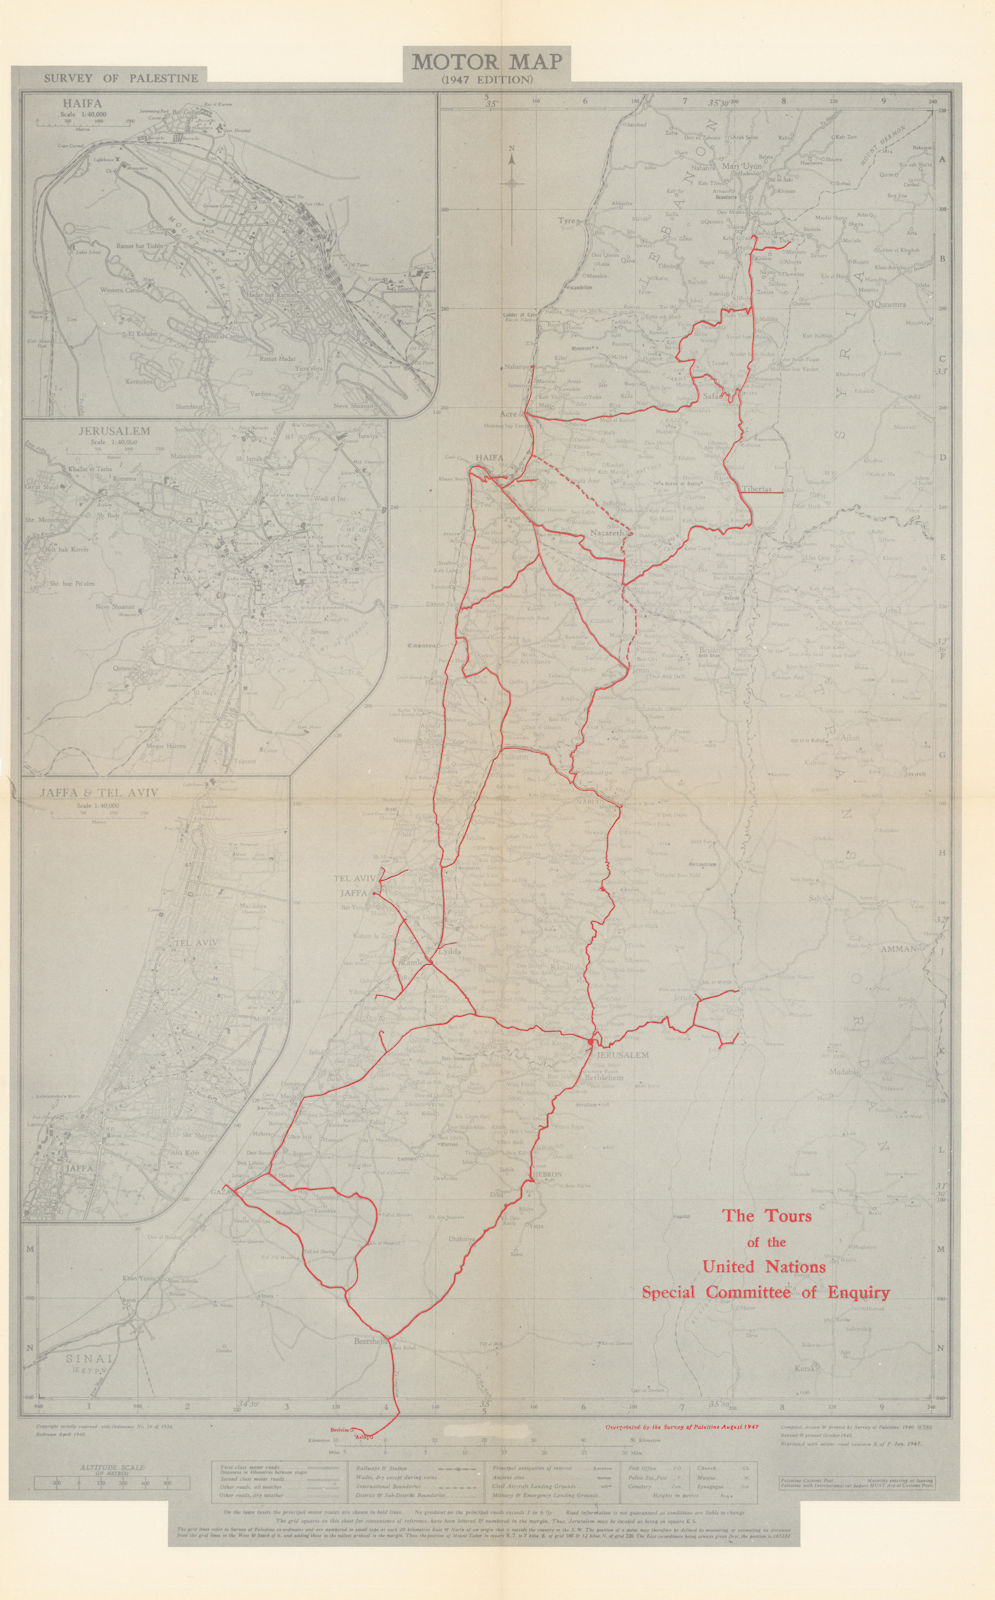 Associate Product The Tours of the United Nations Special Committee of Enquiry. Palestine 1947 map